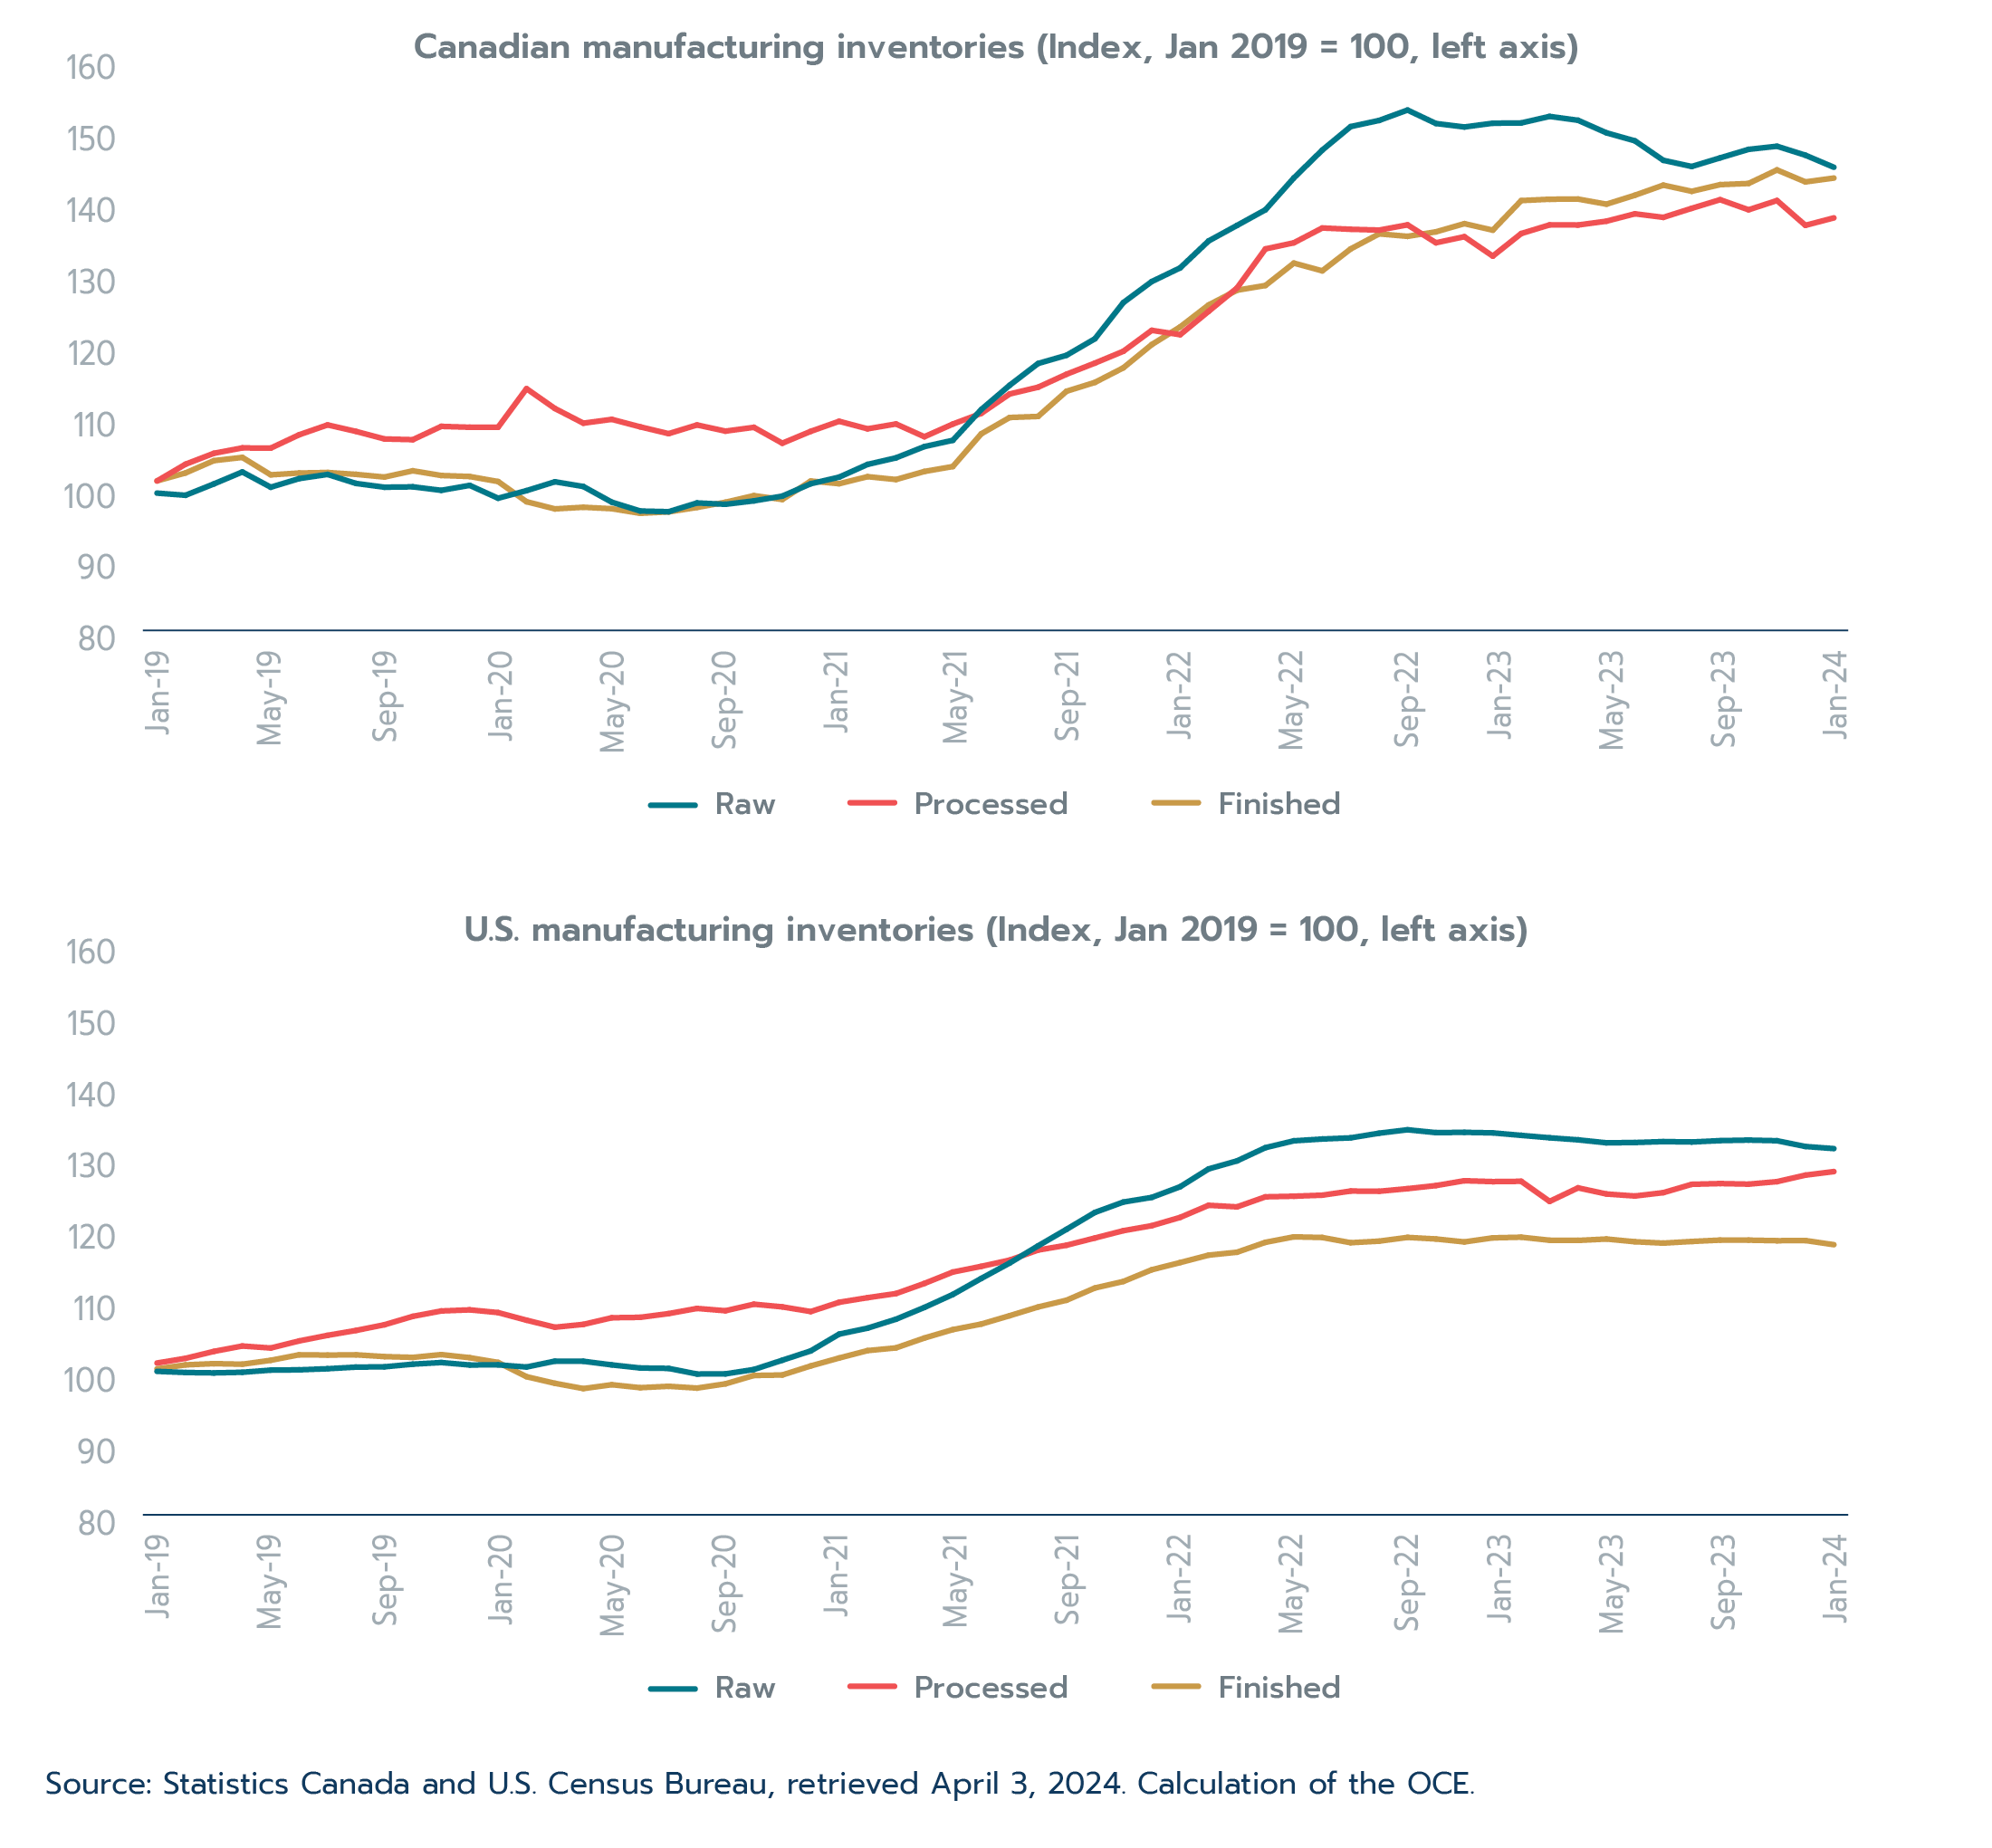 Figure 2.13: Build-up of Canada and U.S. manufacturing inventories